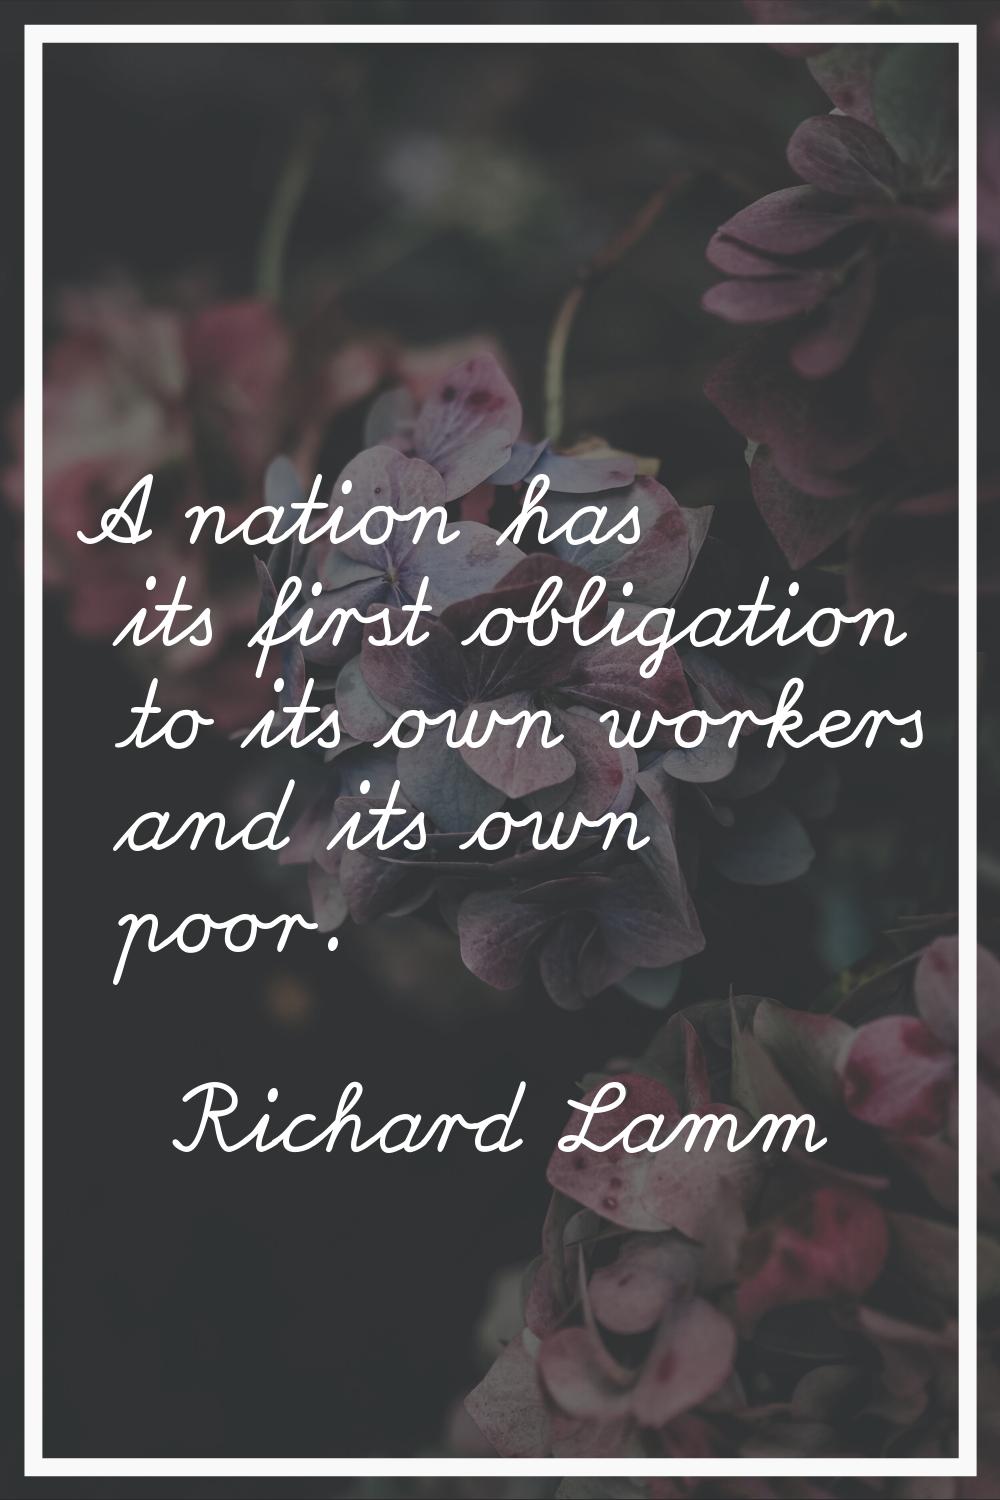 A nation has its first obligation to its own workers and its own poor.